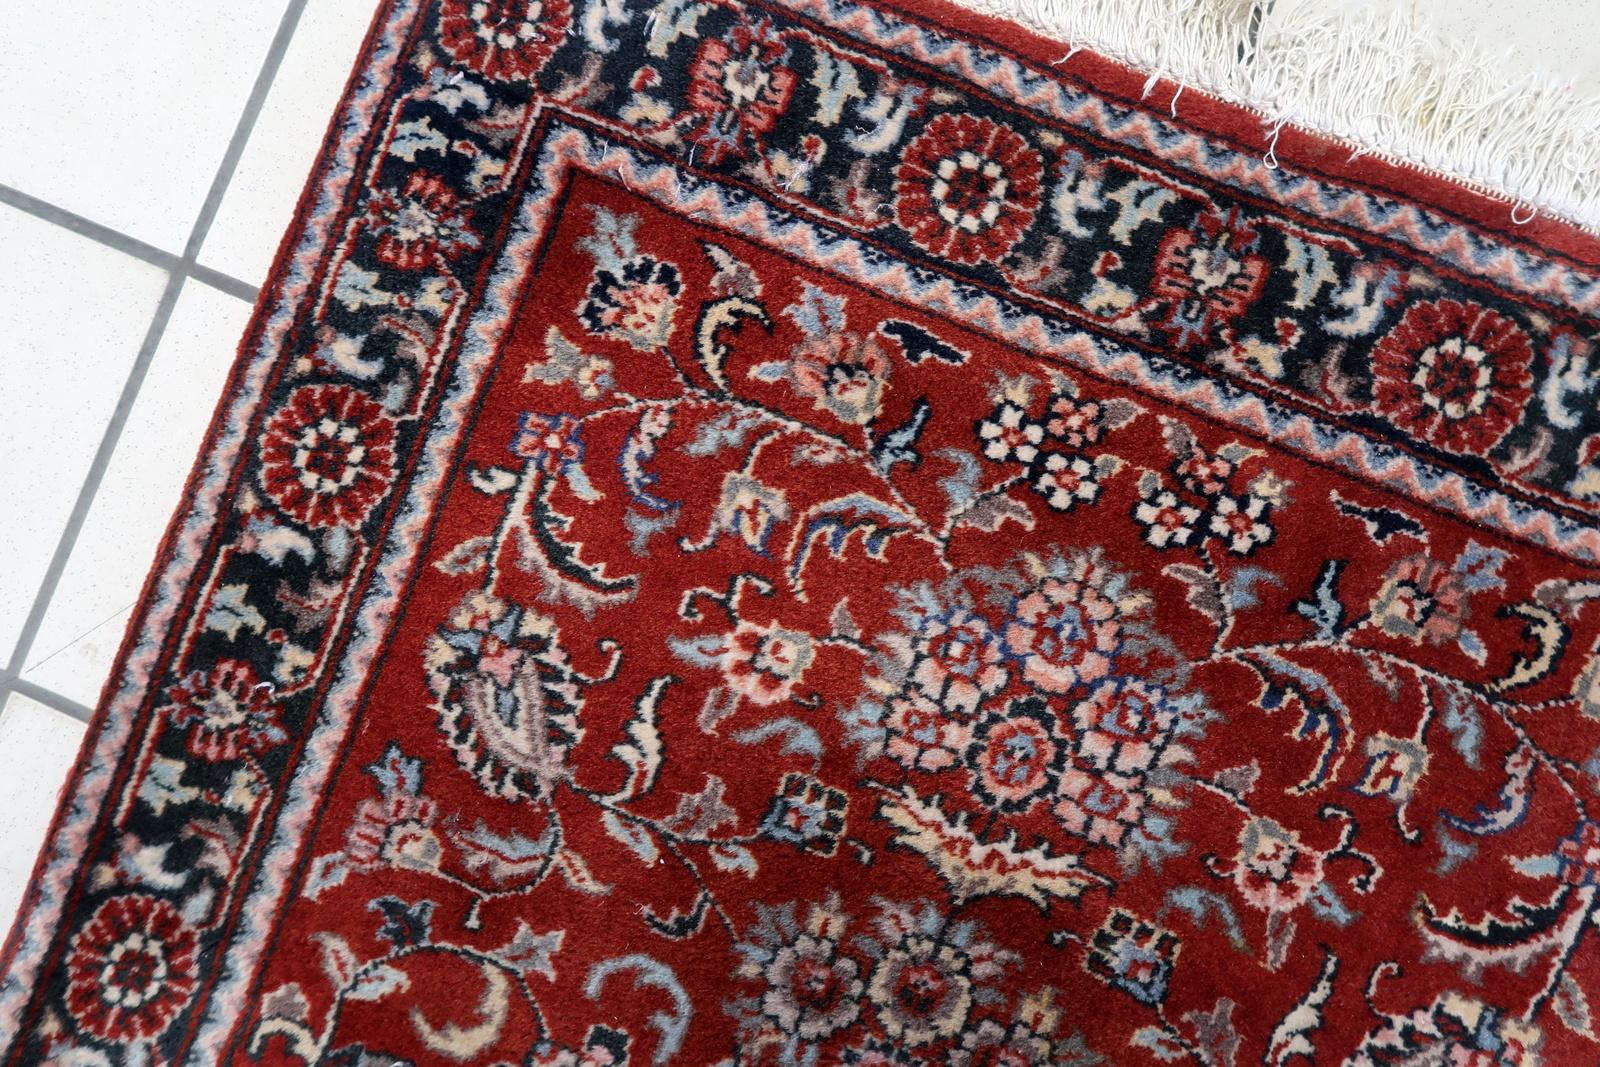 Hand-Knotted Handmade Vintage Persian Style Sarouk Rug 2.4' x 4', 1970s - 1C1115 For Sale